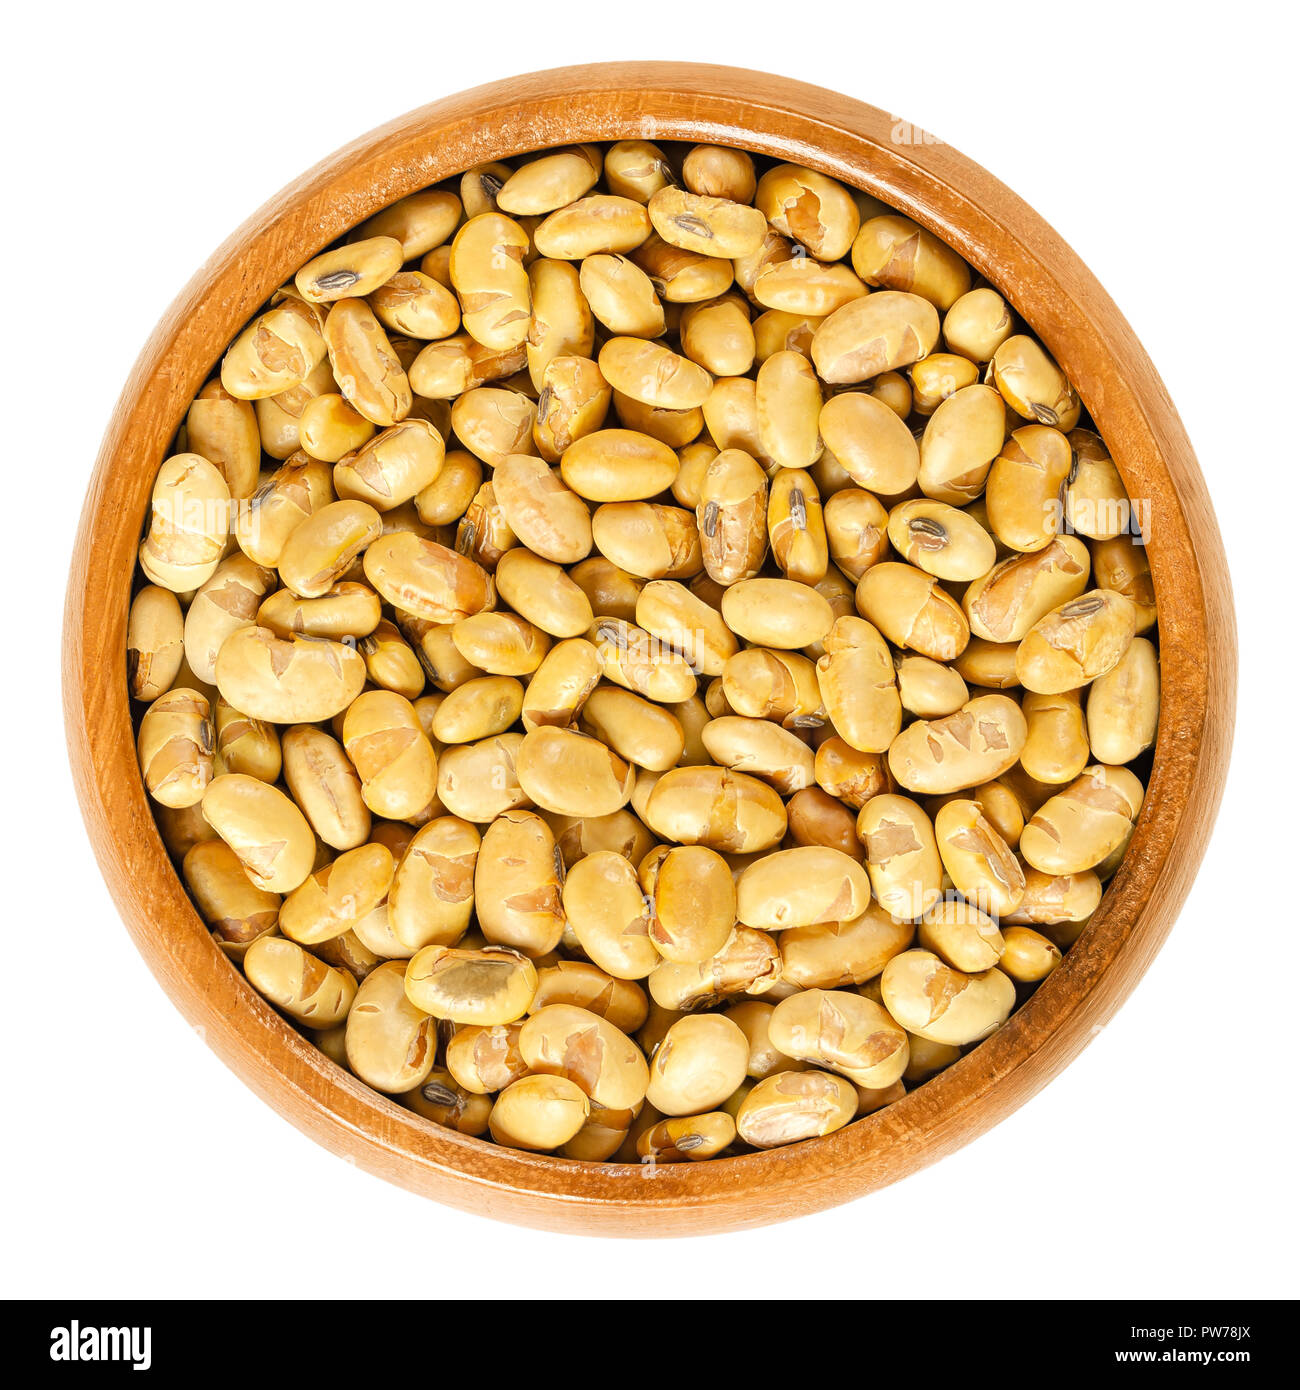 Roasted soybeans in wooden bowl. Dried, yellow soya beans, crispy roasted and slightly salted, used as snack. Rich in protein. Legume. Stock Photo